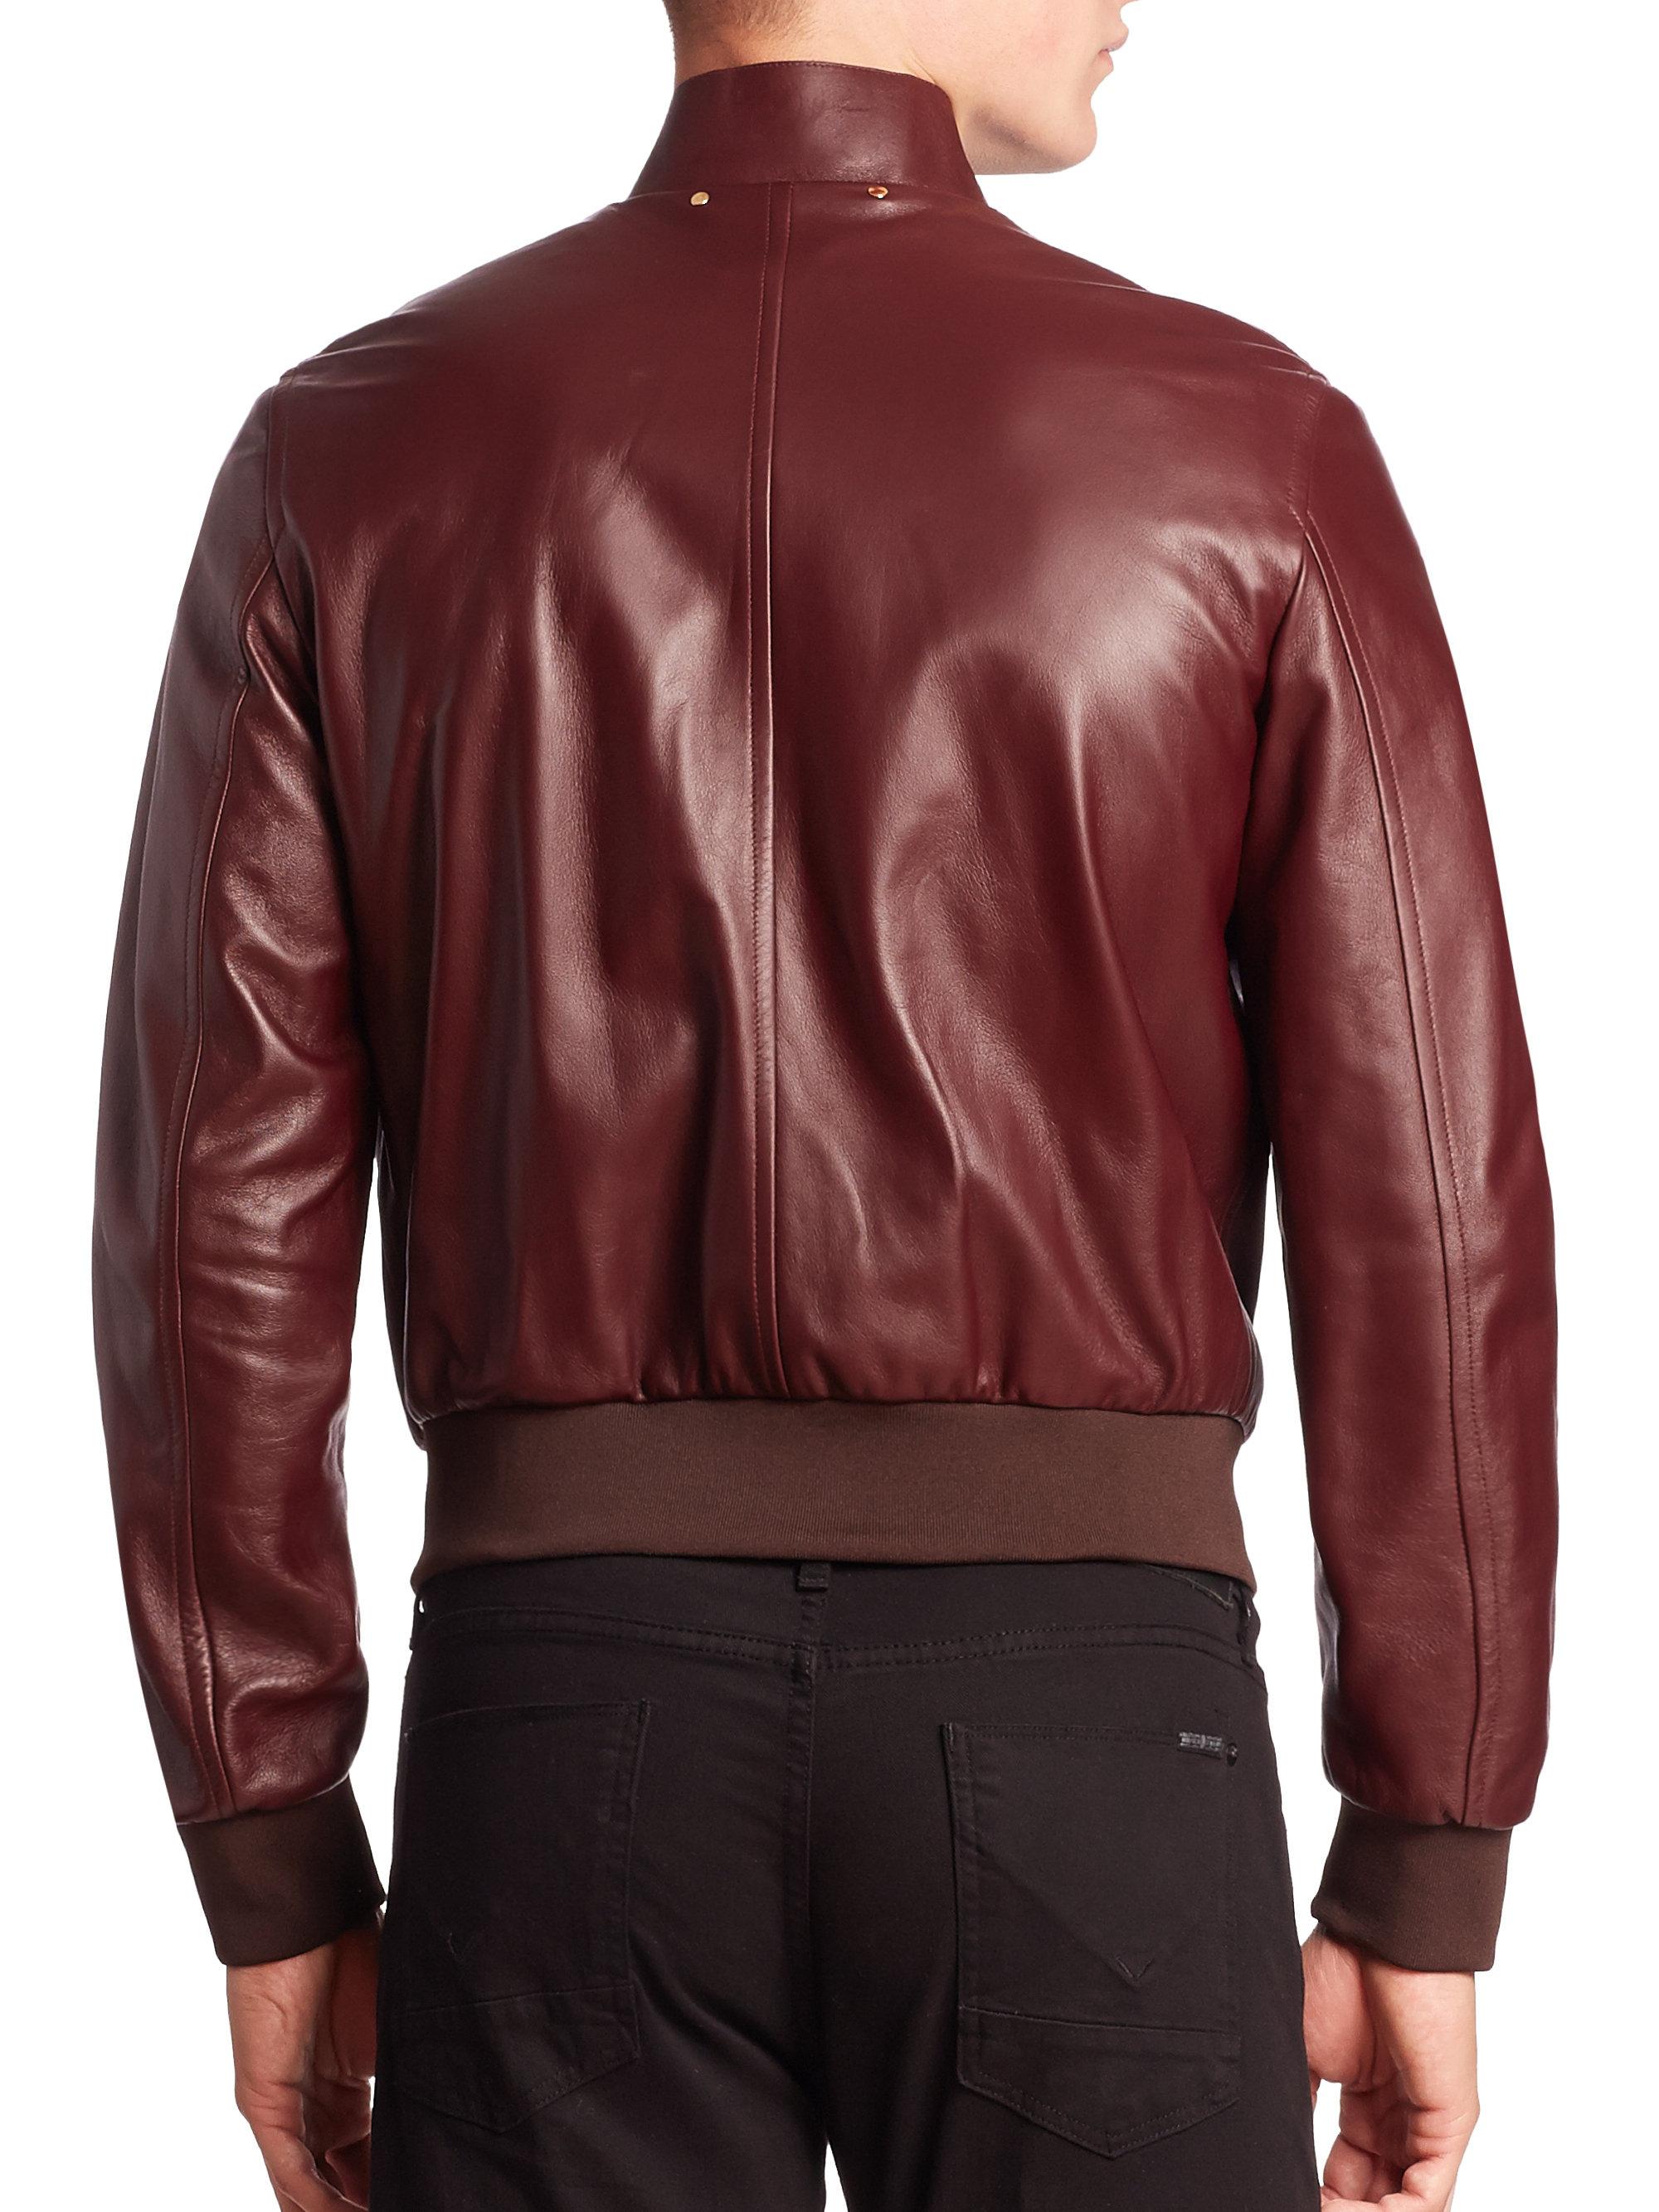 Paul Smith Lamb Leather Jacket for Men - Lyst